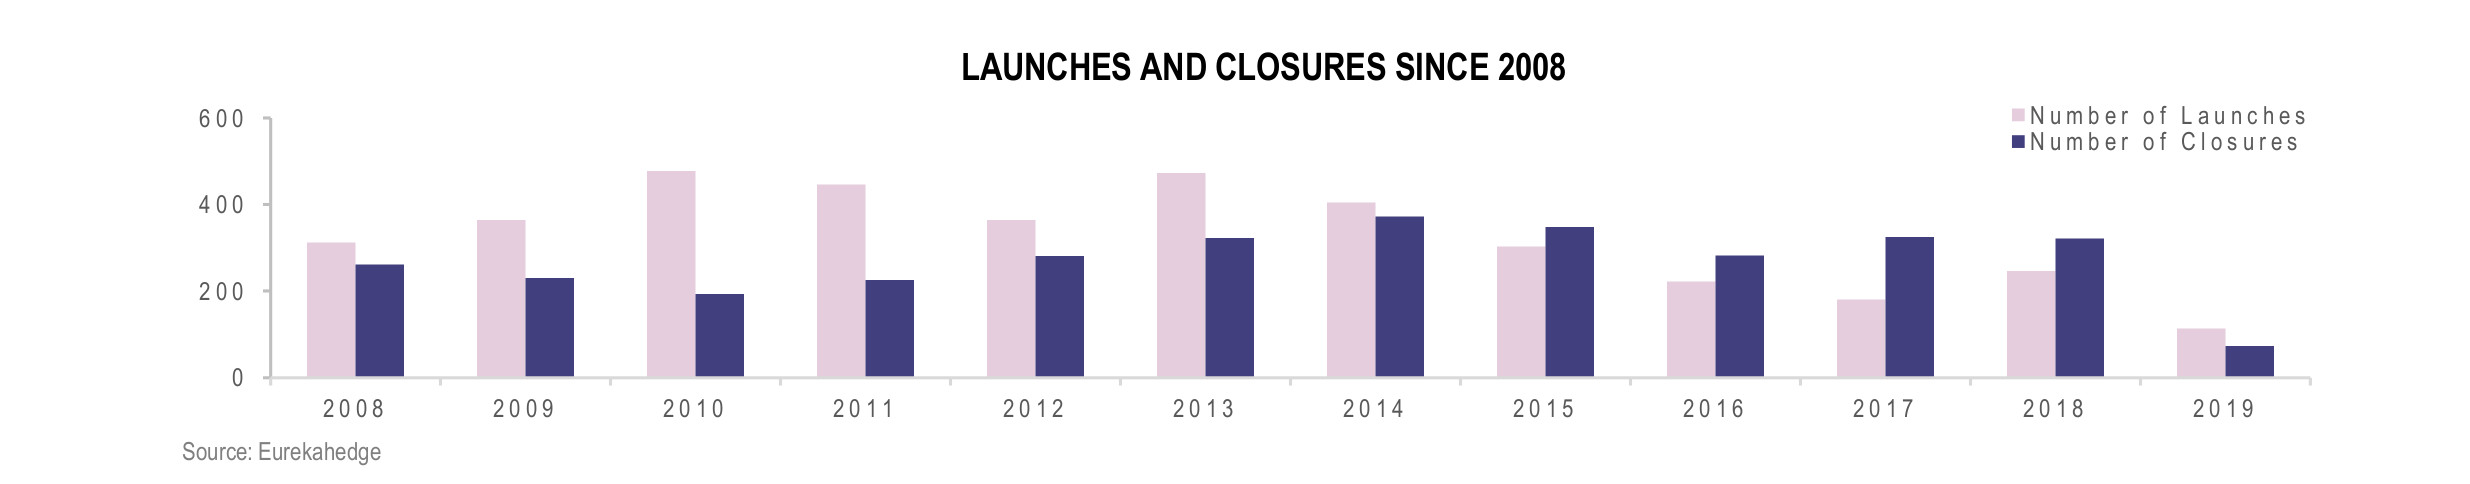 European Hedge Funds Infographic July 2019 - launches and closures